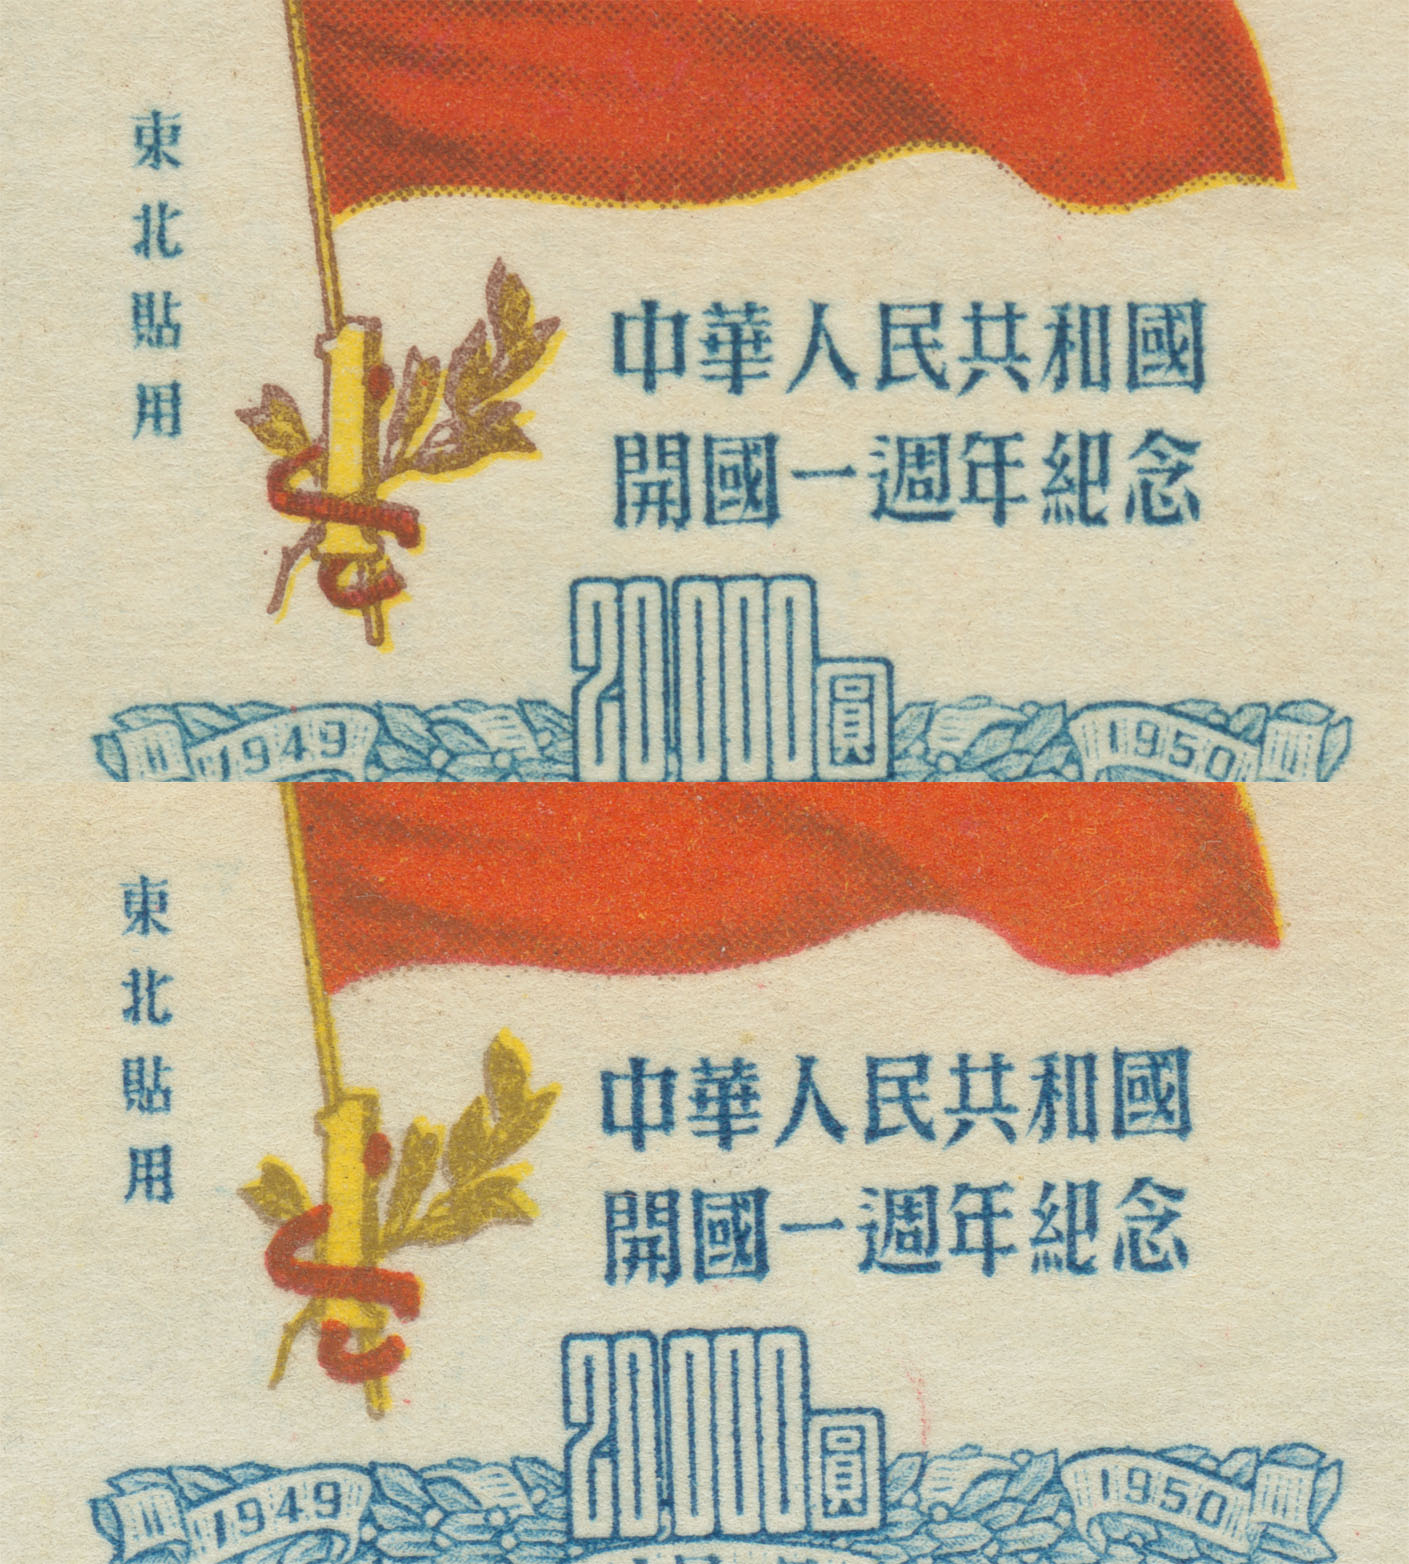 First Anniversary of the Founding of the People's Republic of 